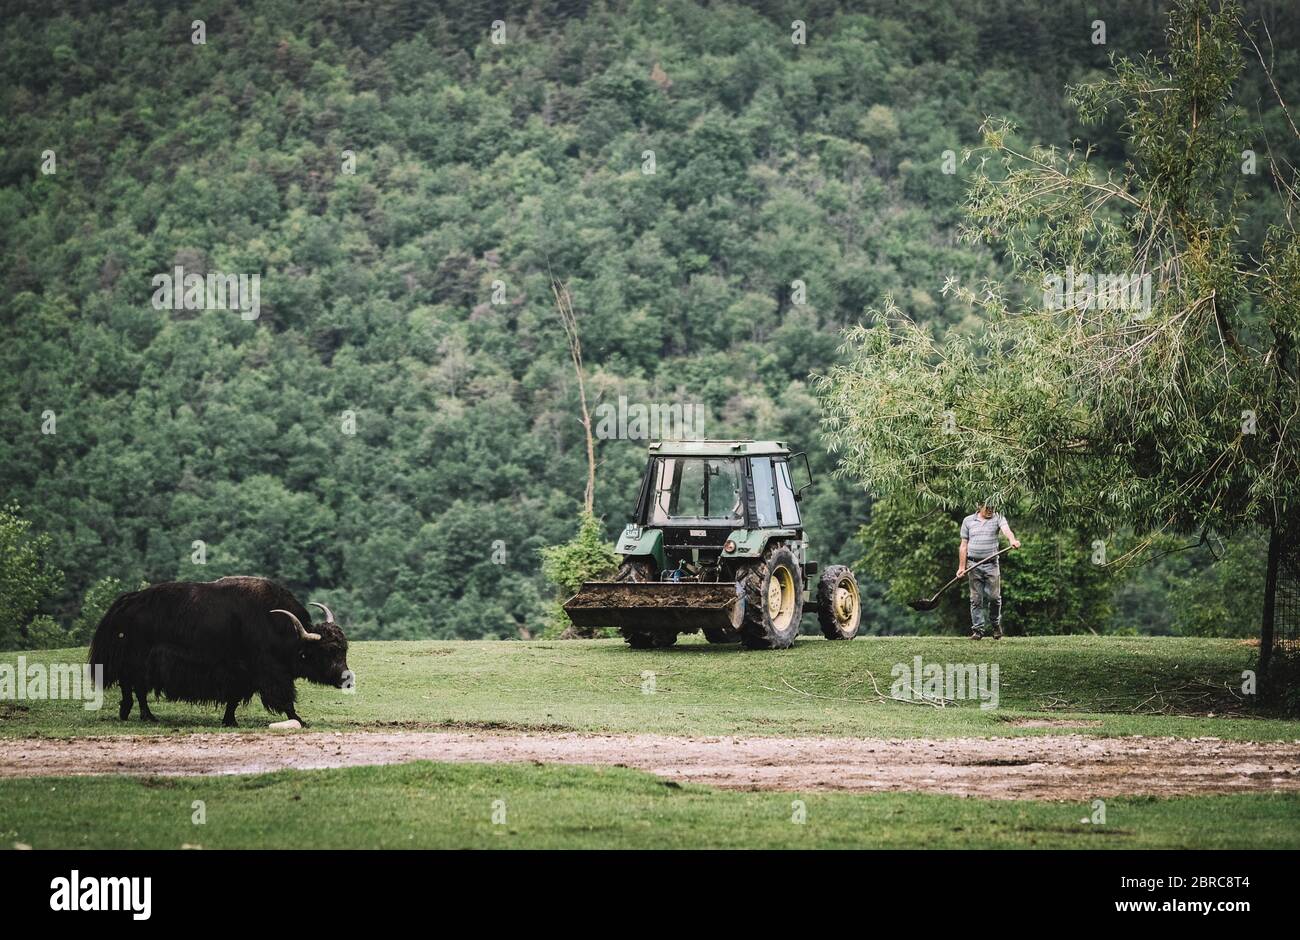 Murazzano, Italy. 20th May, 2020. A staff member works at Langhe safari park in Murazzano, Italy, May 20, 2020. The Langhe safari park has been closed since March due to the COVID-19 pandemic. In order to continue feeding and taking care of the animals, the park has to seek help from restaurateurs, farmers and shopkeepers to donate food to feed the animals. Credit: Federico Tardito/Xinhua/Alamy Live News Stock Photo